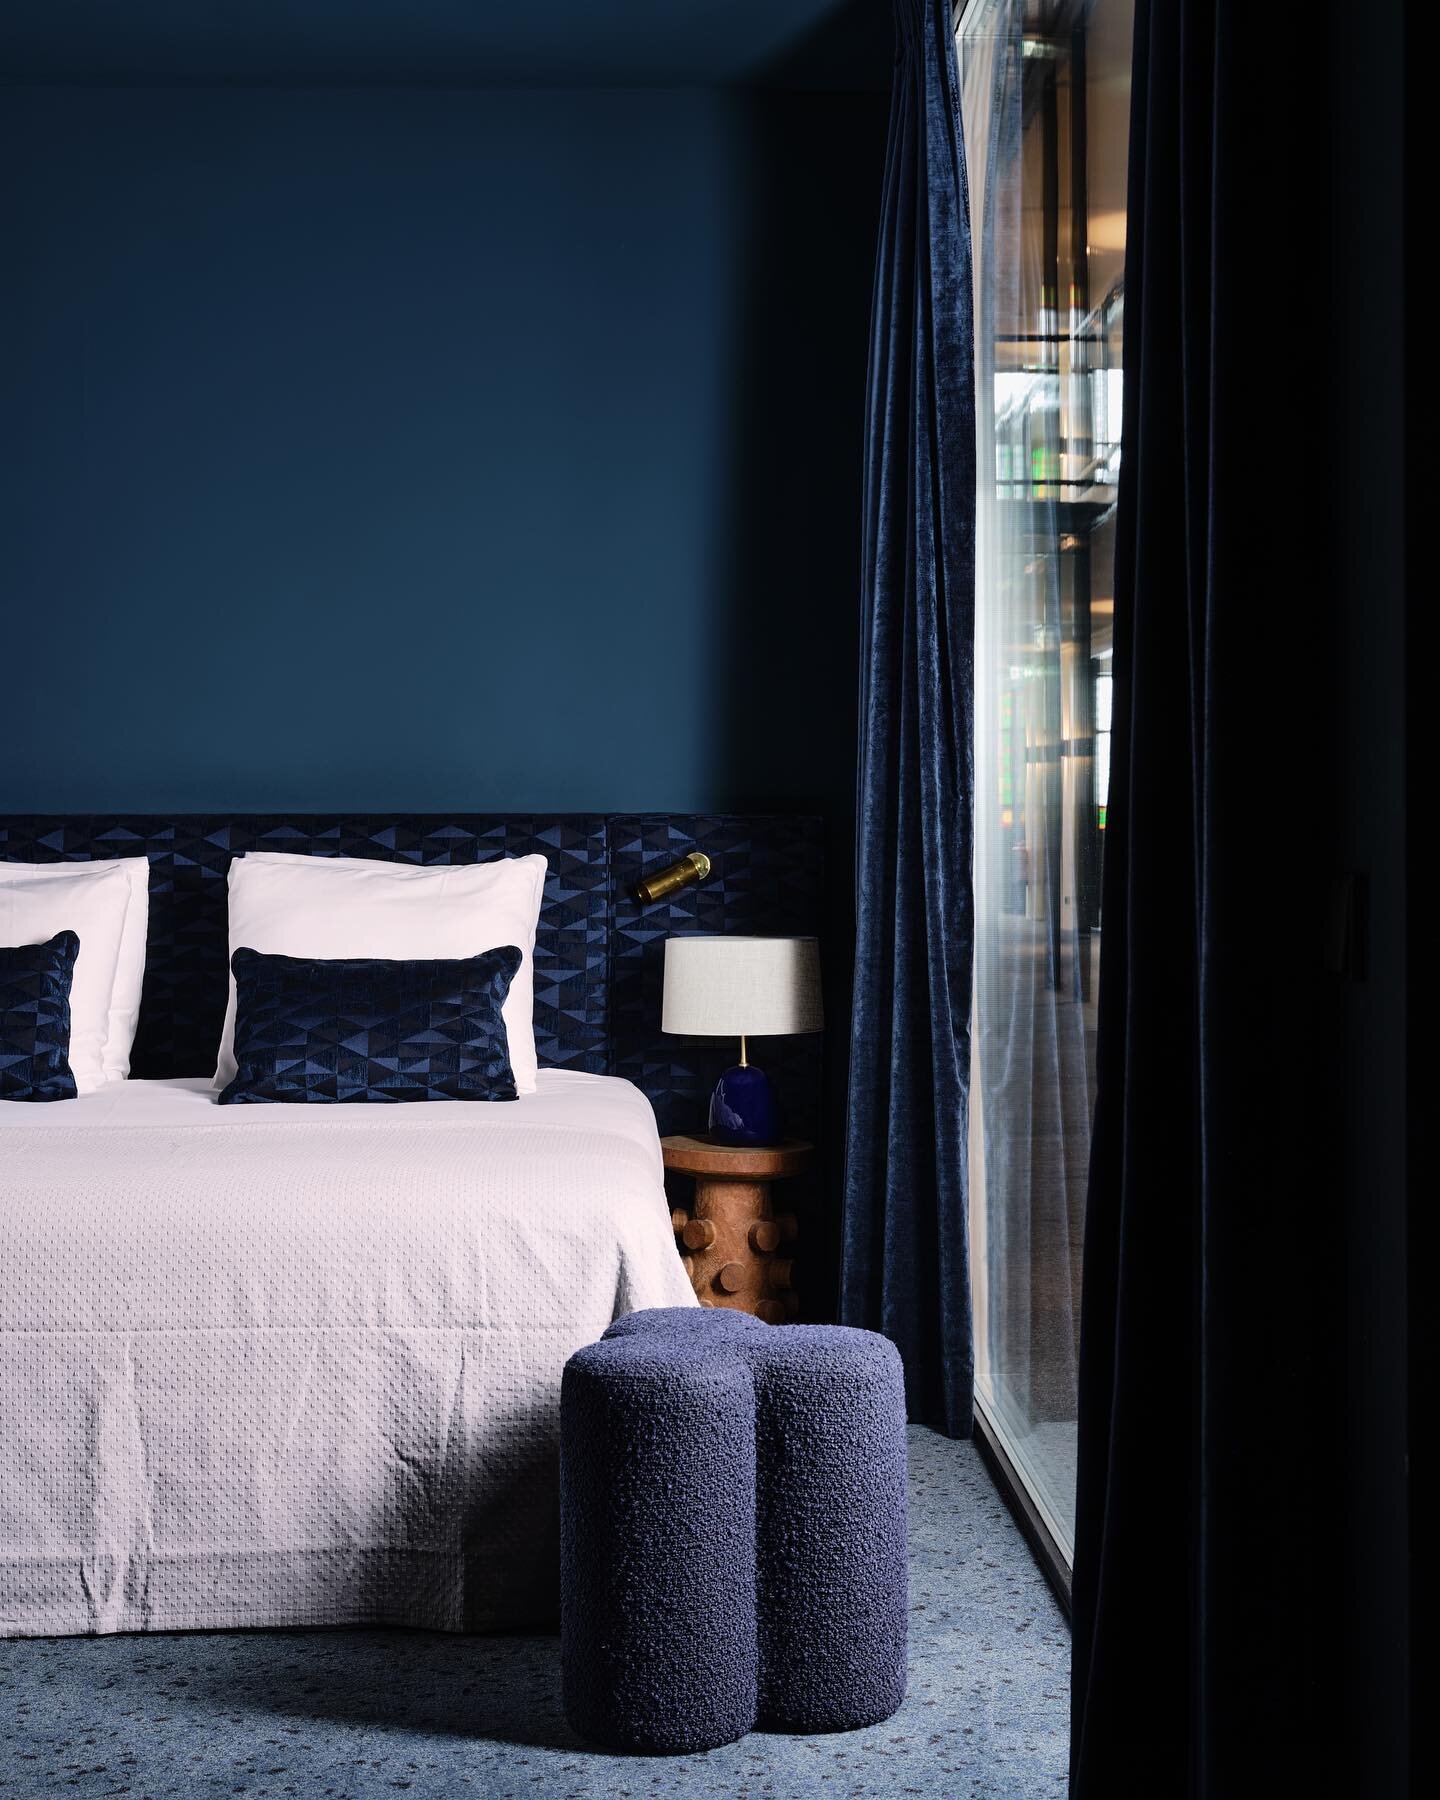 HINABAAY &bull; HOORN 

The shade of blue applied on the wall is anything but ordinary. Powerful without being dominant, but above all rich and atmospheric. The use of different tones makes for an exciting, yet harmonious image. 

Photography by @spa